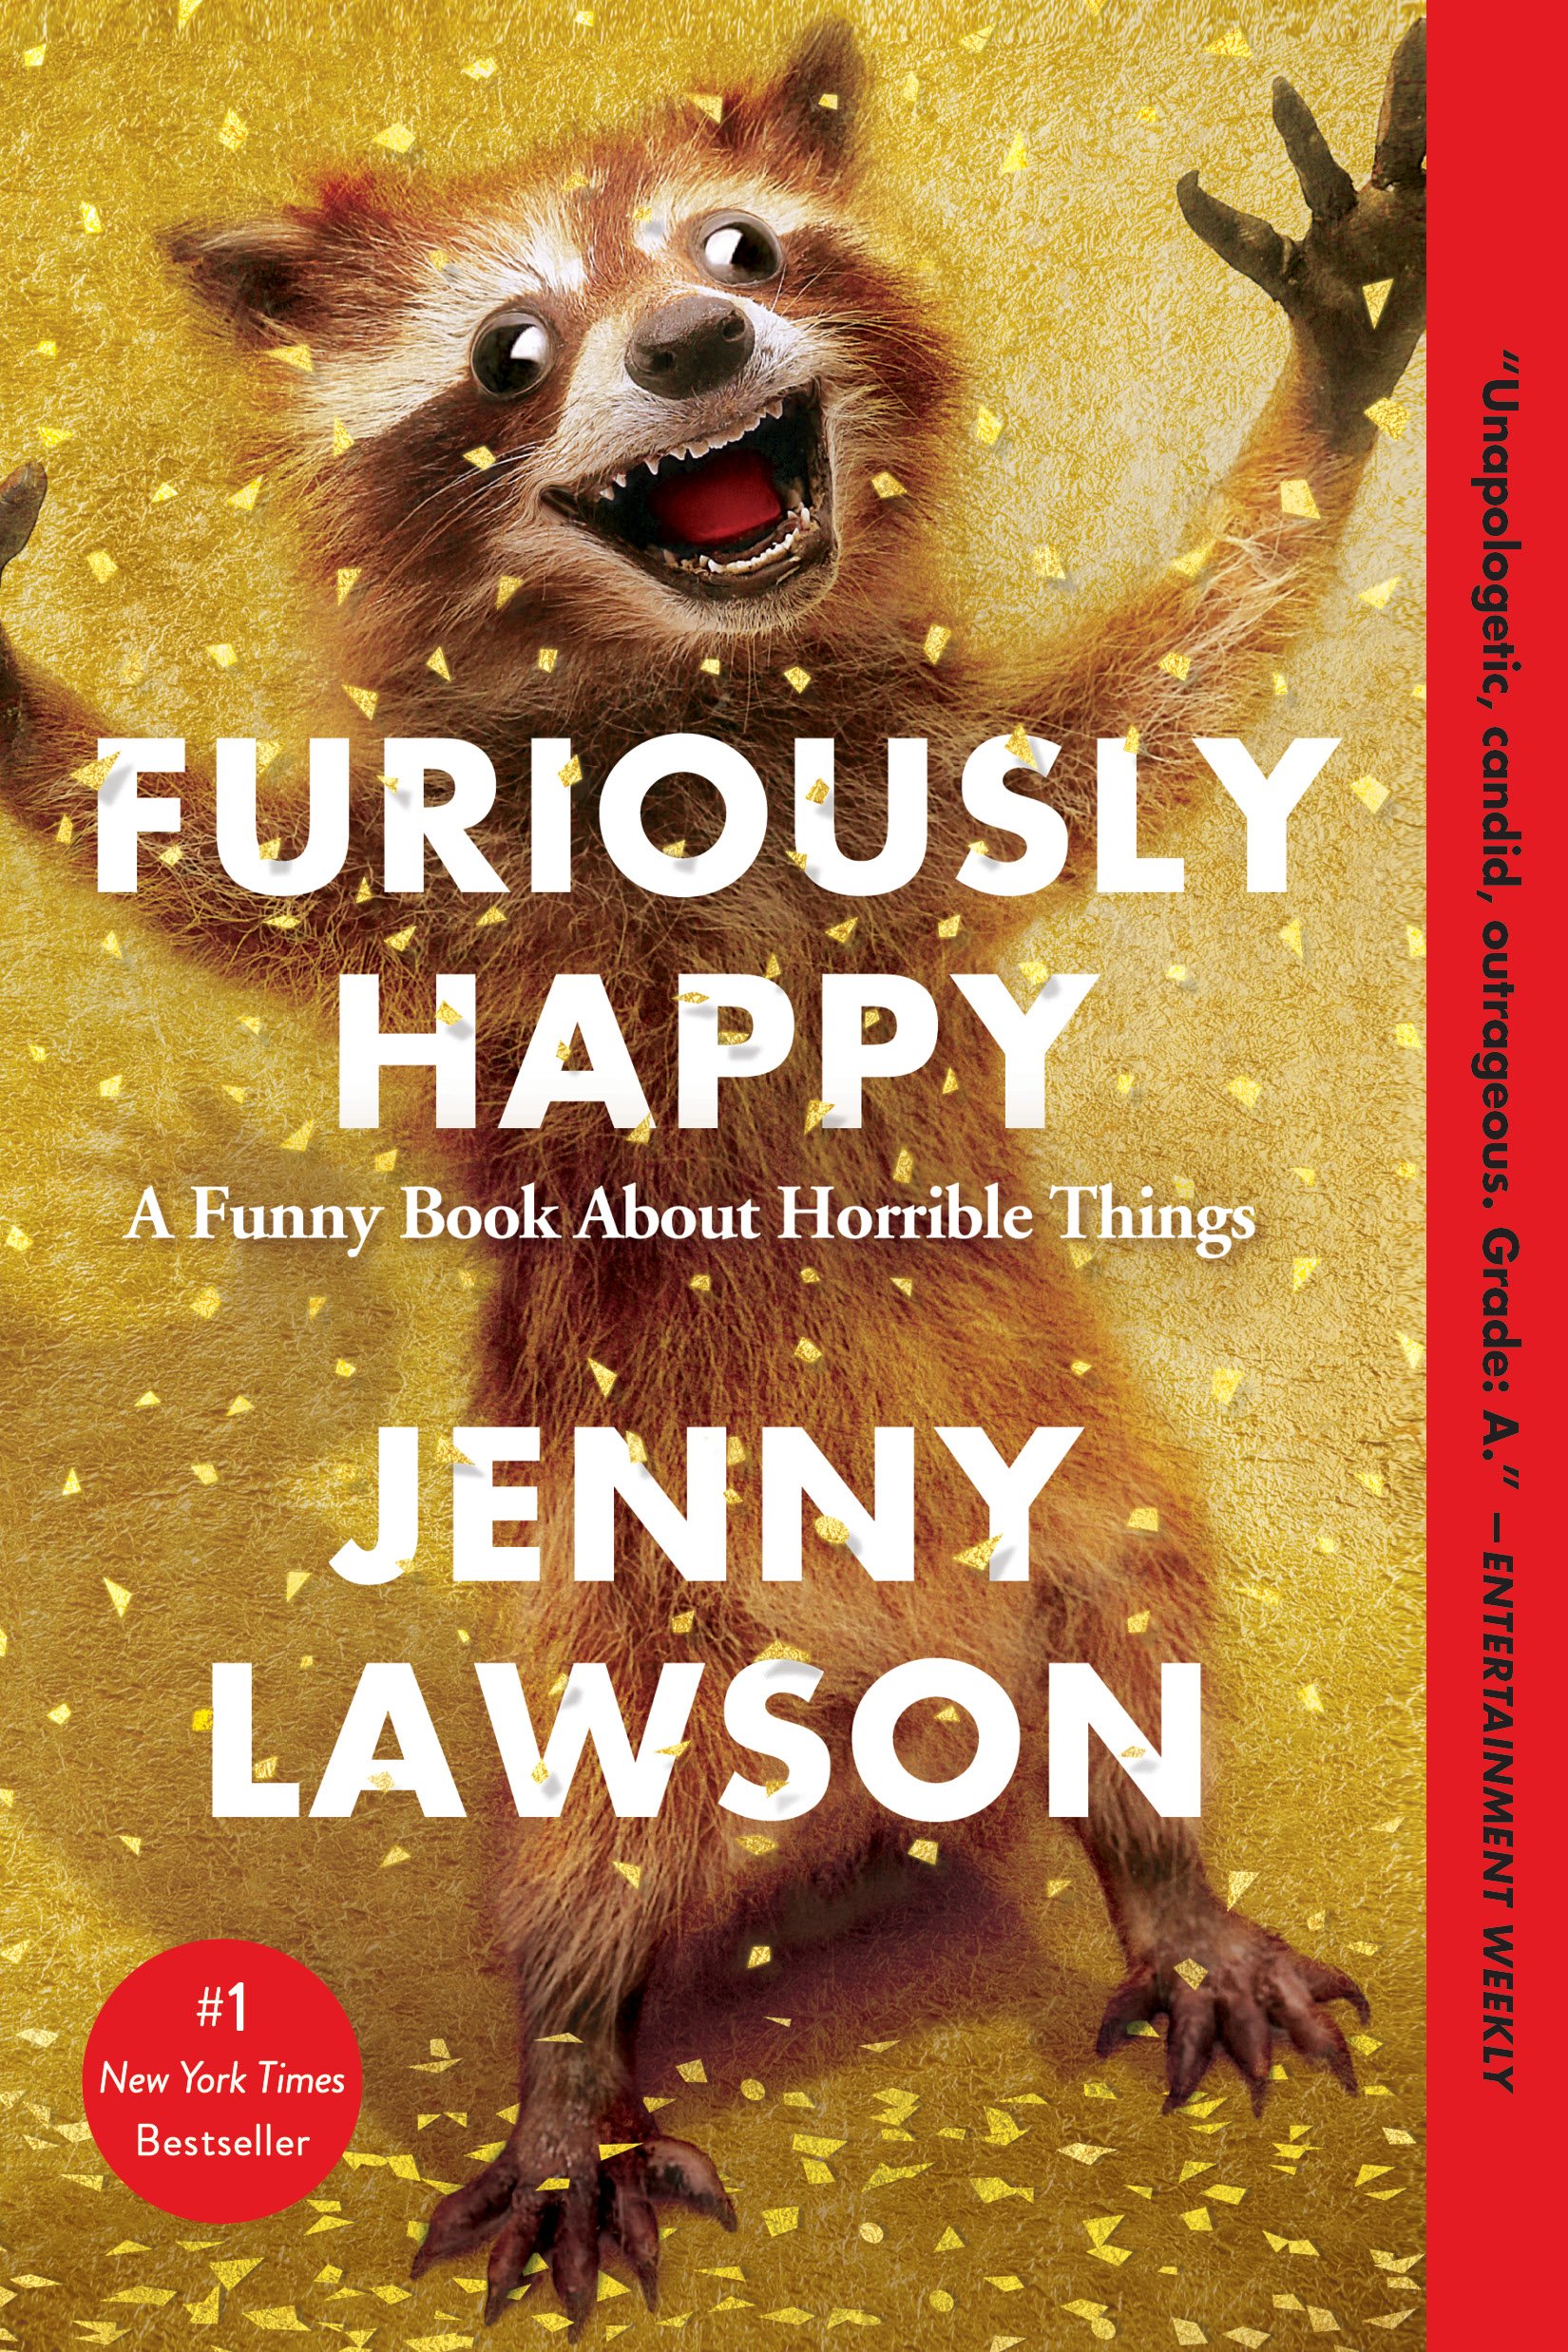 11 Hilarious, Heartwarming Books to Read When You Need a Good Laugh - Off  the Shelf